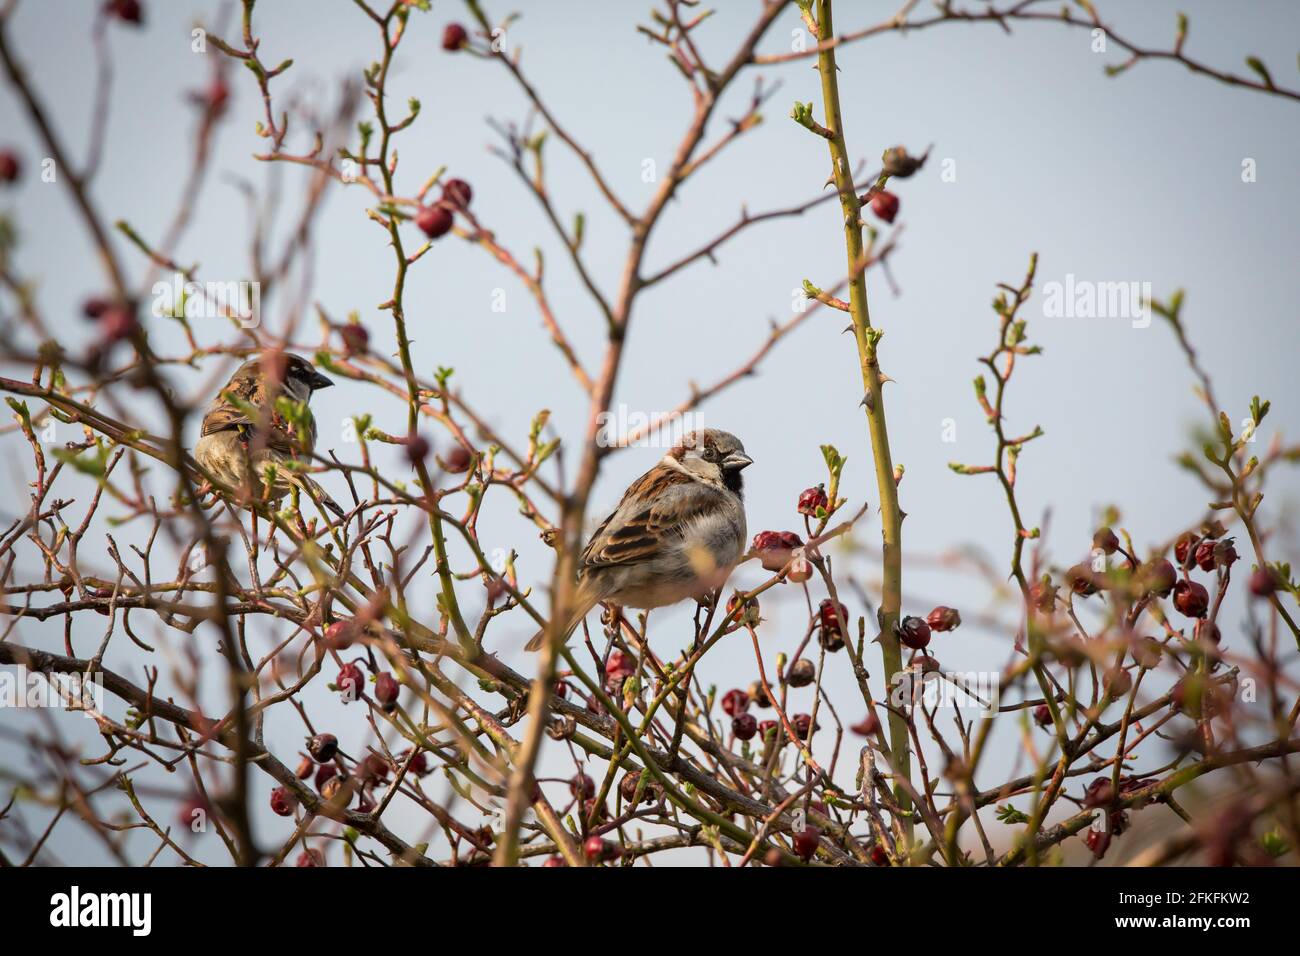 House sparrow sitting in branches (Passer domesticus) Stock Photo